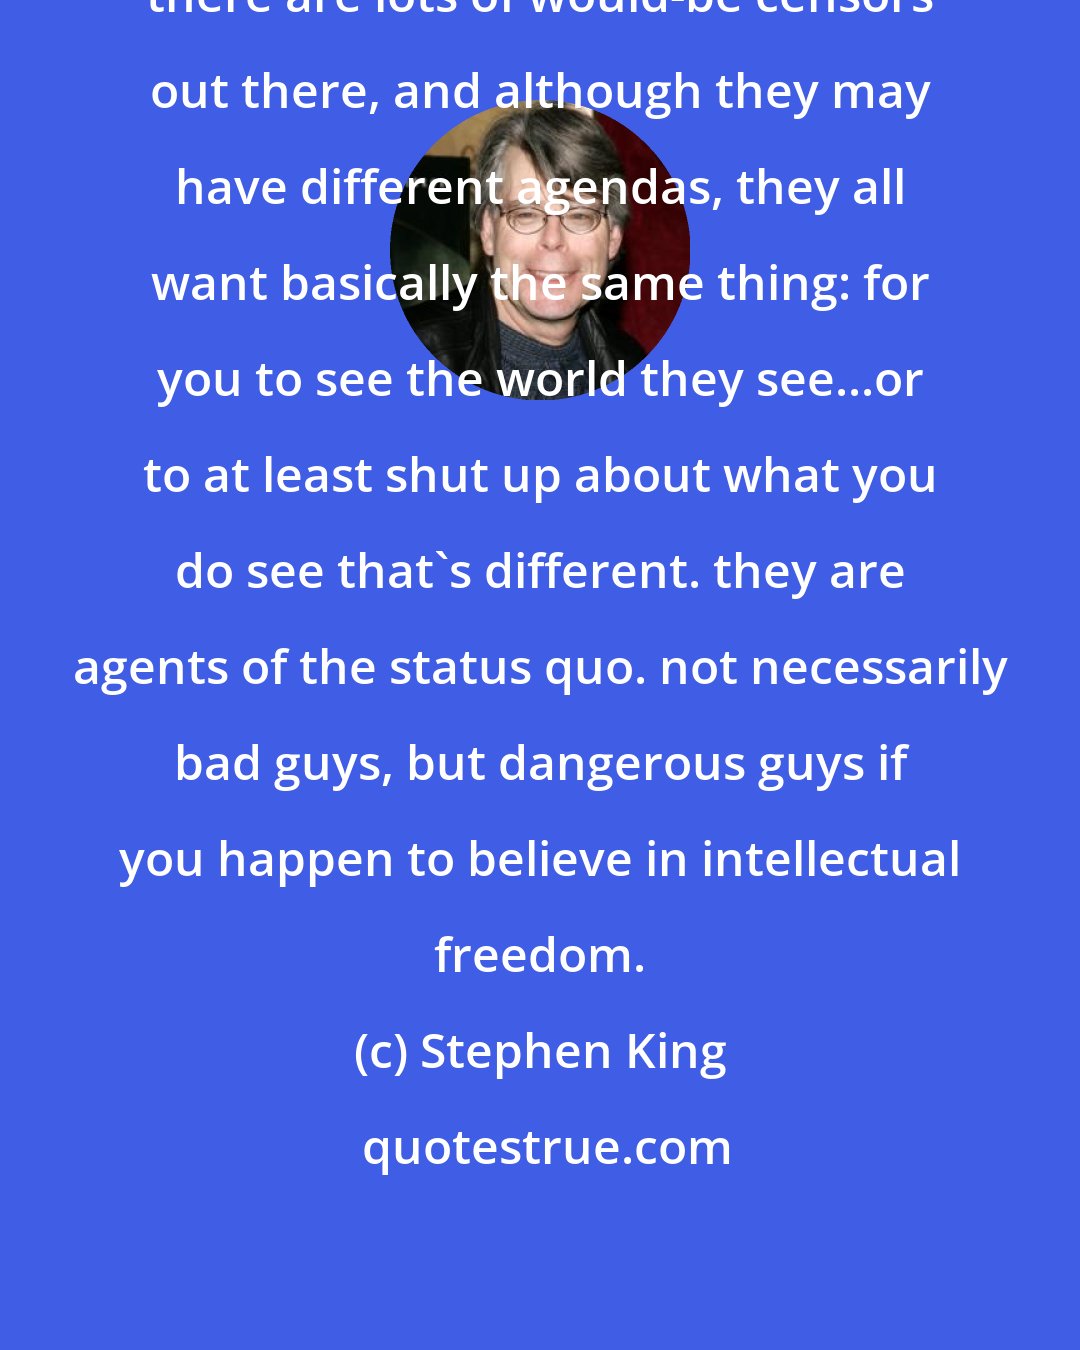 Stephen King: there are lots of would-be censors out there, and although they may have different agendas, they all want basically the same thing: for you to see the world they see...or to at least shut up about what you do see that's different. they are agents of the status quo. not necessarily bad guys, but dangerous guys if you happen to believe in intellectual freedom.